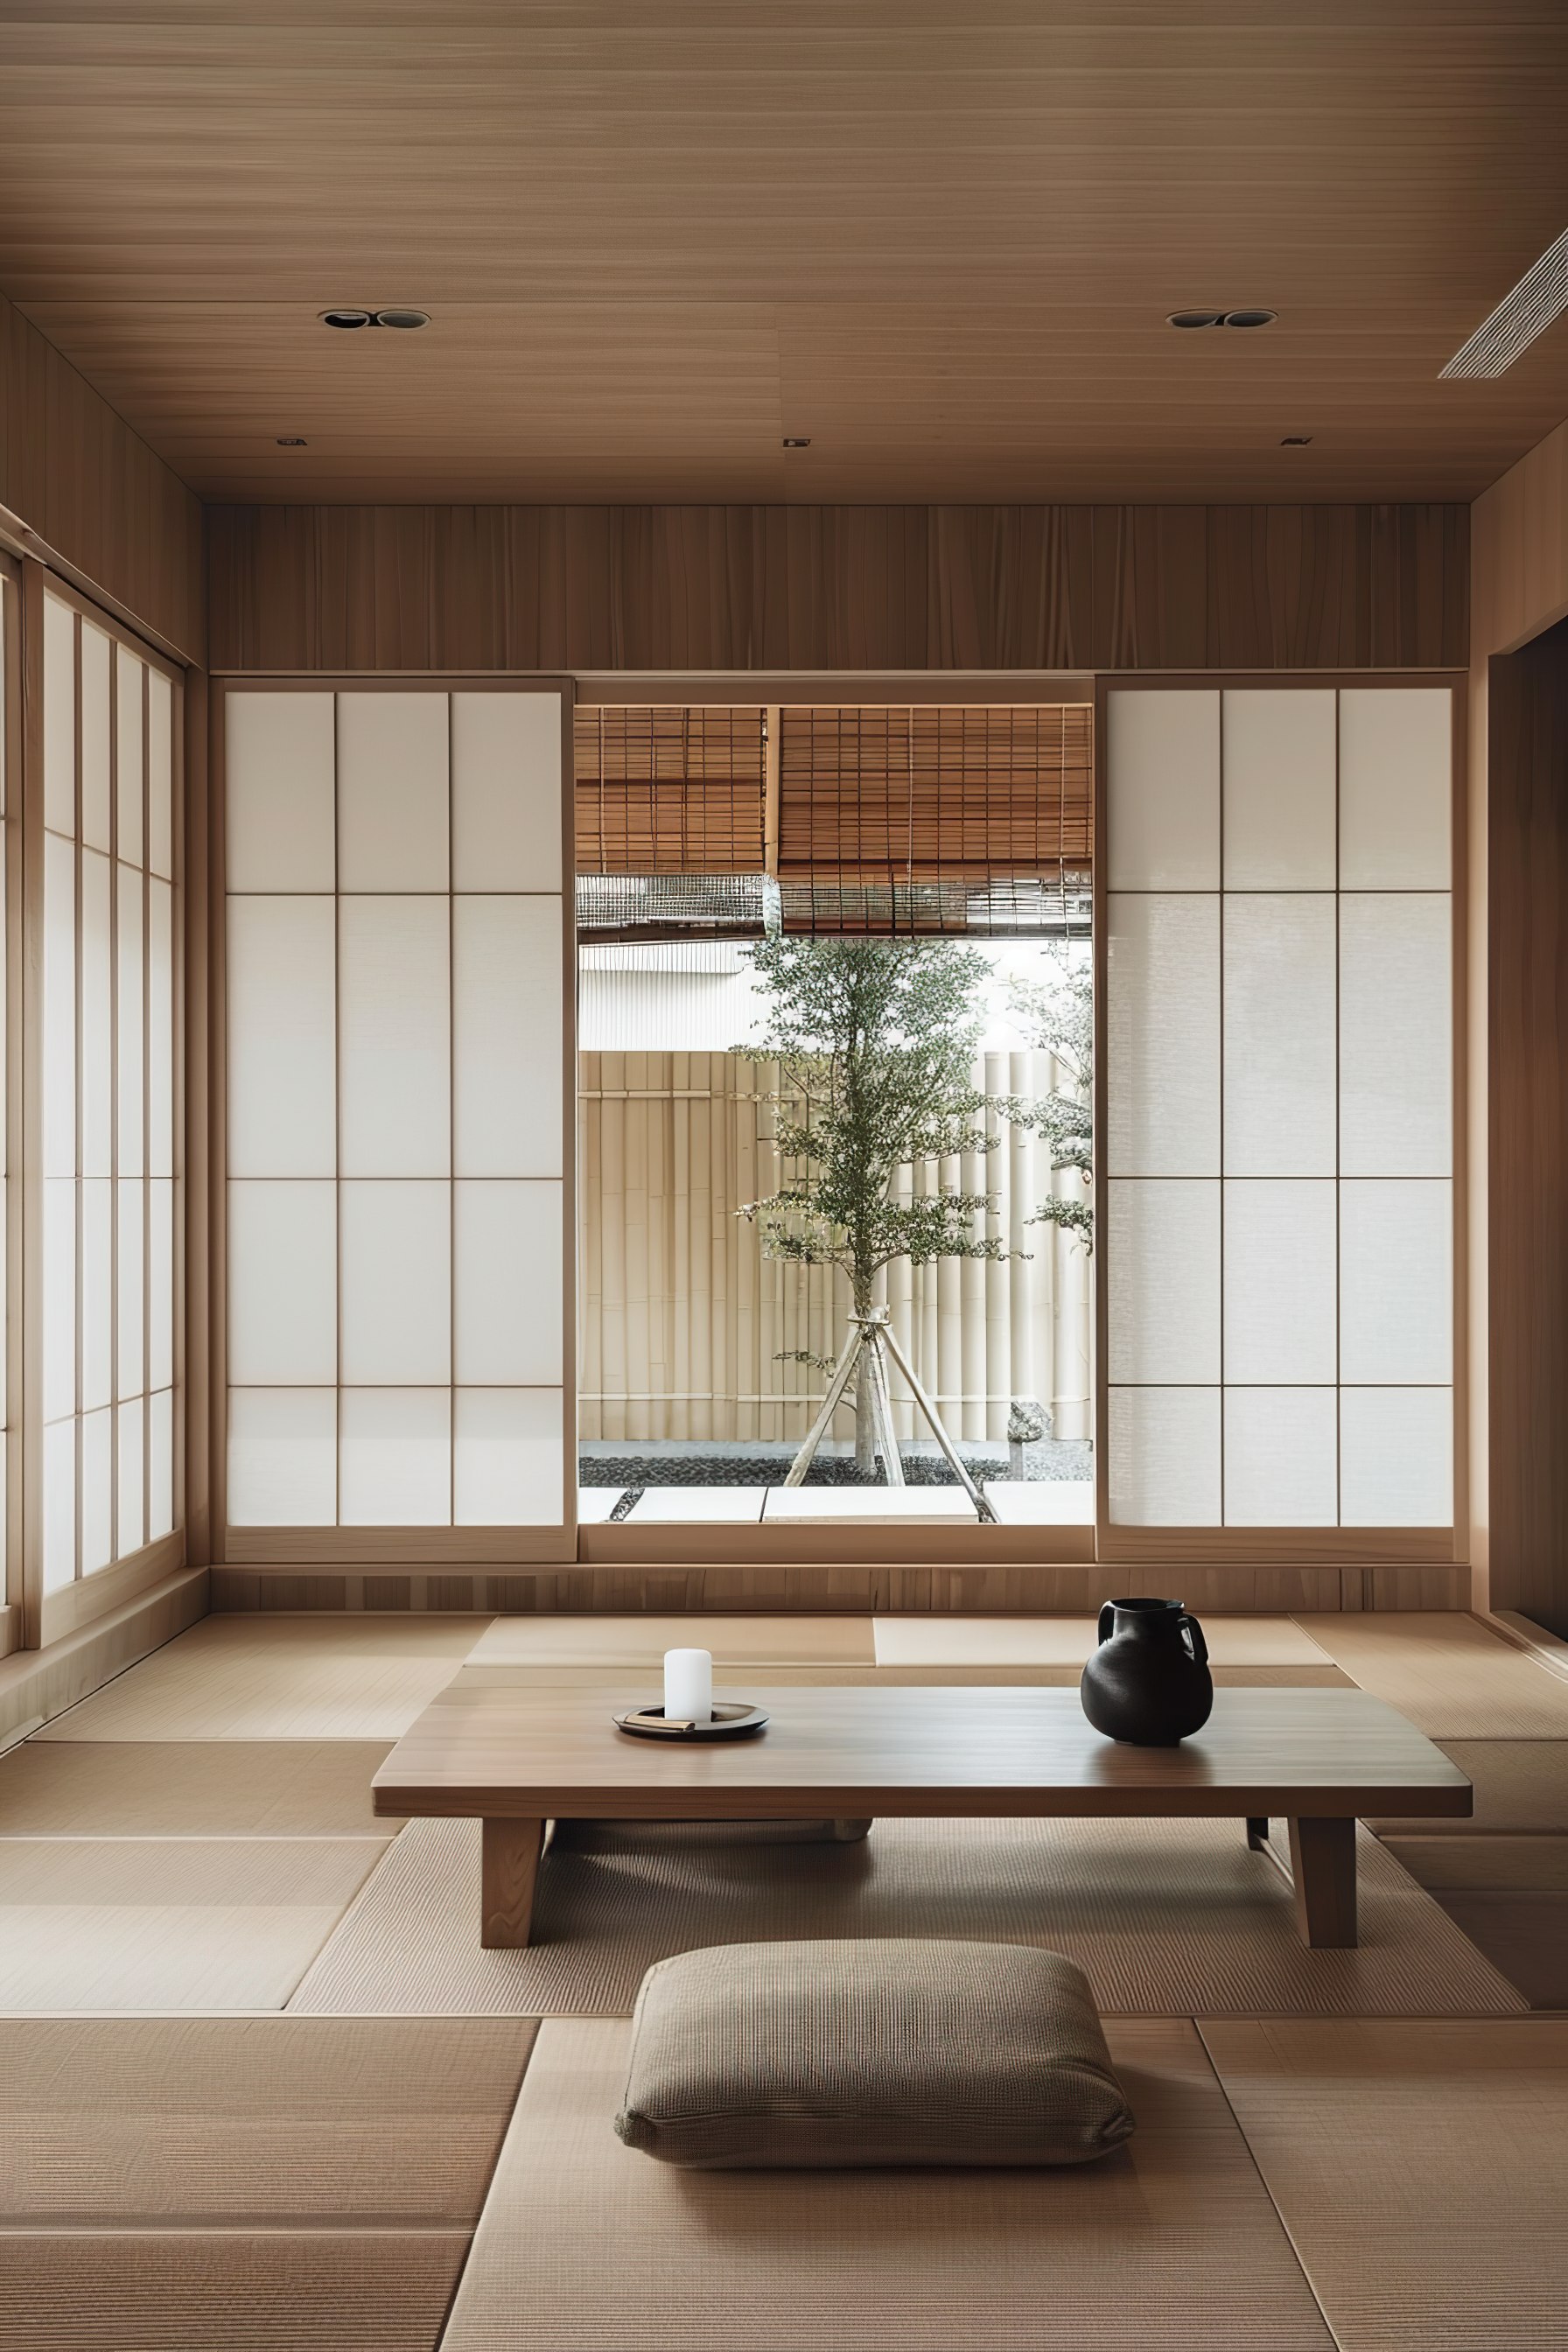 A serene Japanese-style room with tatami flooring, sliding shoji doors, low table, cushion, and a view of a Zen garden.